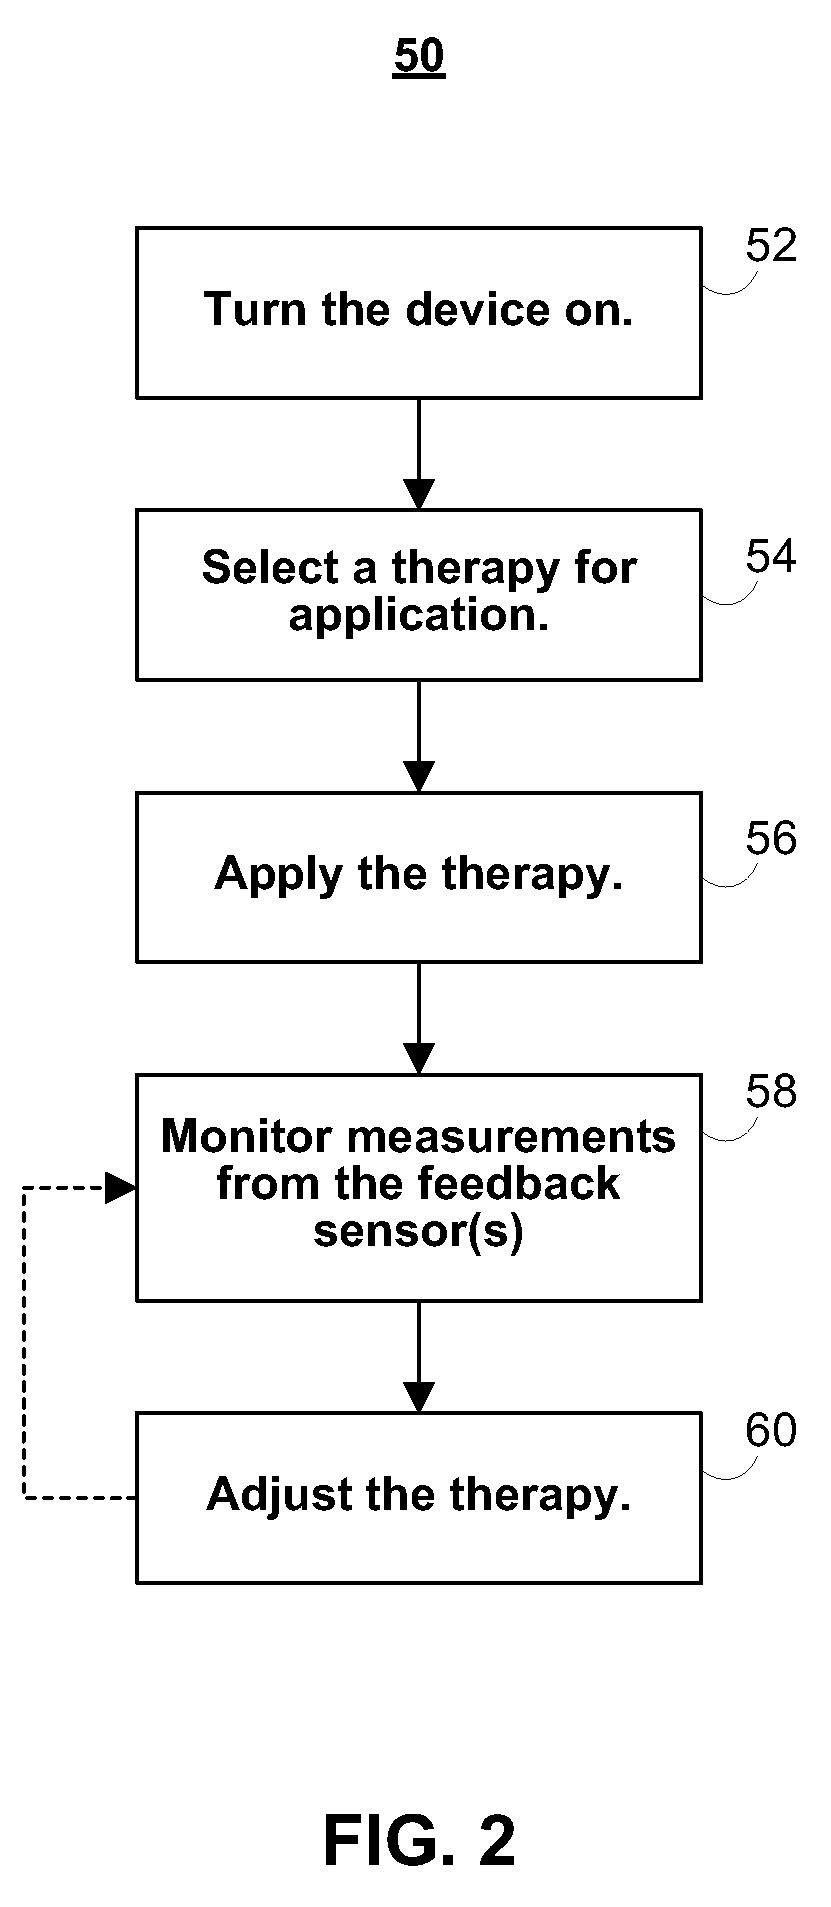 Apparatus and methods for facilitating wound healing and treating skin